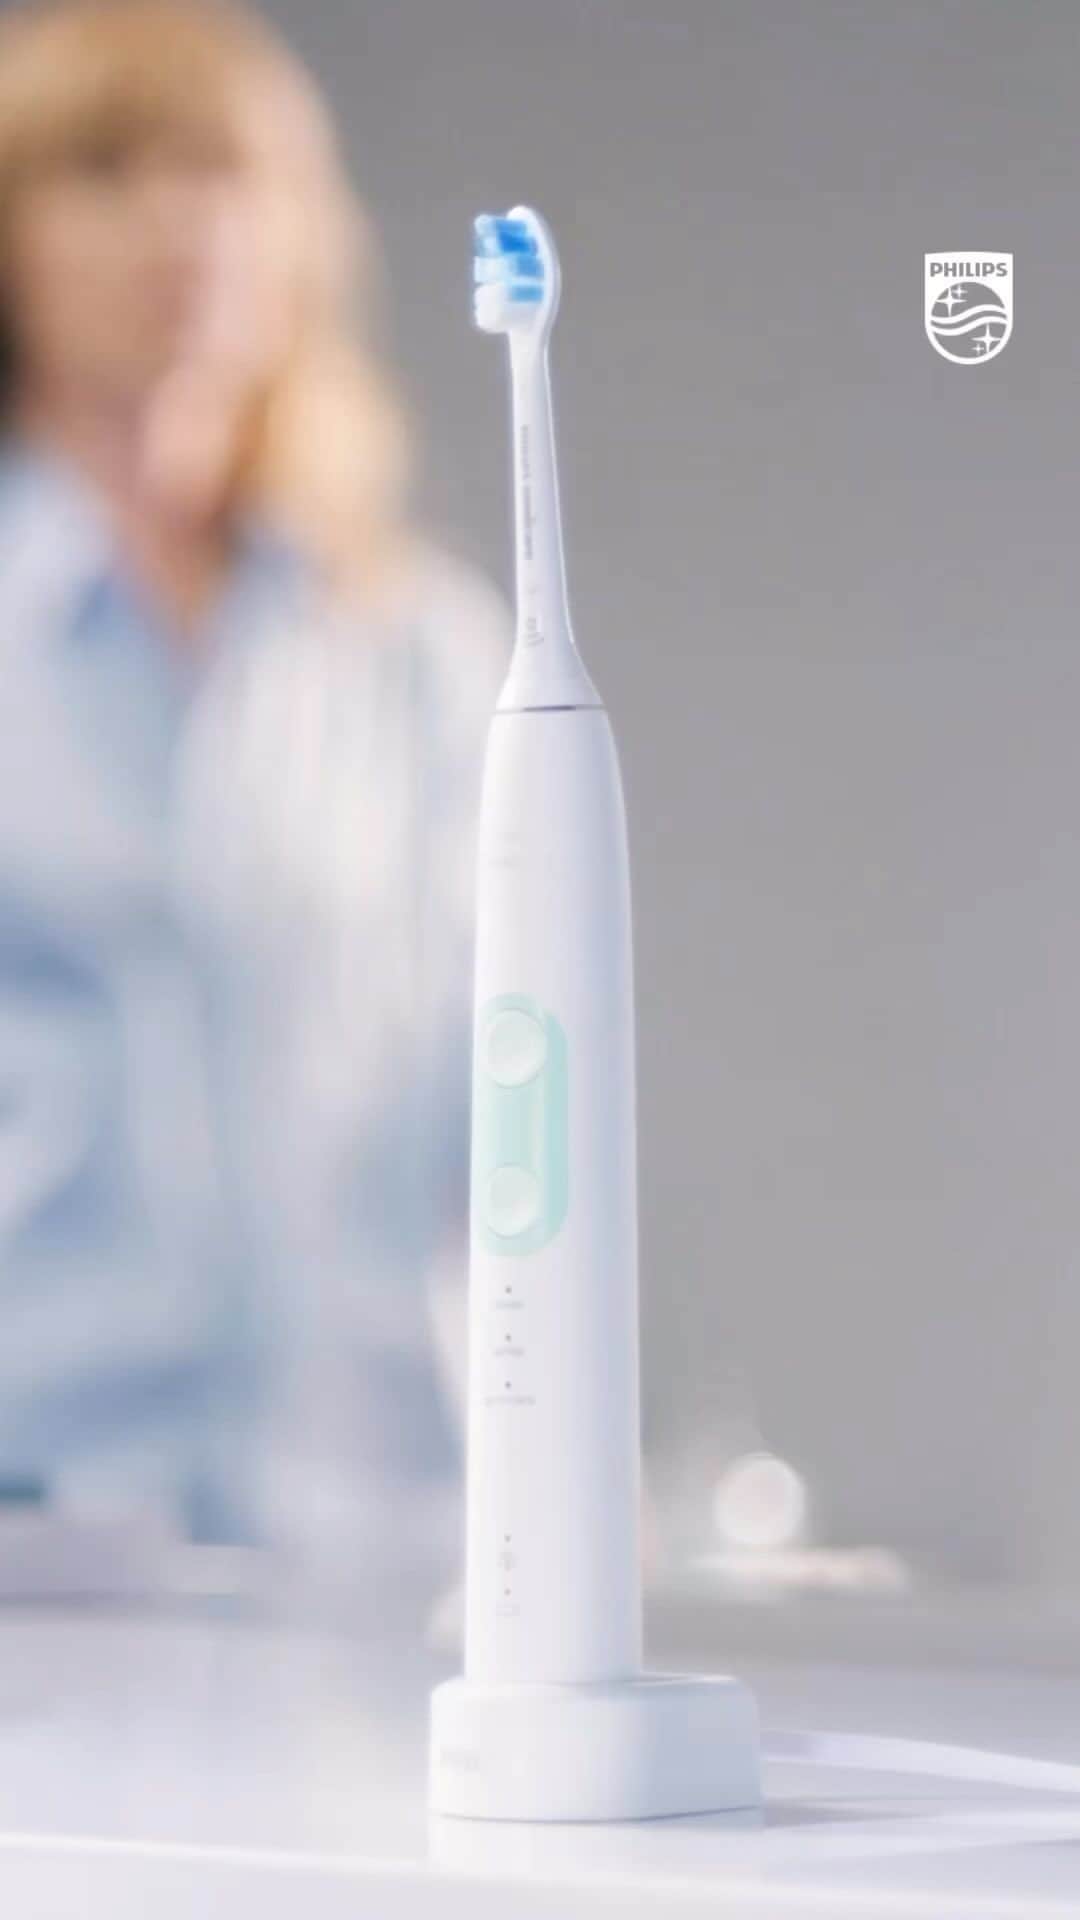 Philips Sonicareのインスタグラム：「Improve gum health by up to 100% more than a manual toothbrush* with Philips Sonicare ProtectiveClean 5100! The densely-packed, high-quality bristles give you extra gentle brushing to remove plaque along the gumline in just two minutes. Now that’s something to smile about.  What are you smiling about today?  *Removes up to 7x more plaque vs. a manual toothbrush  #PhilipsSonicare #OralHealth #DentalHealth #ProtectiveClean5100」